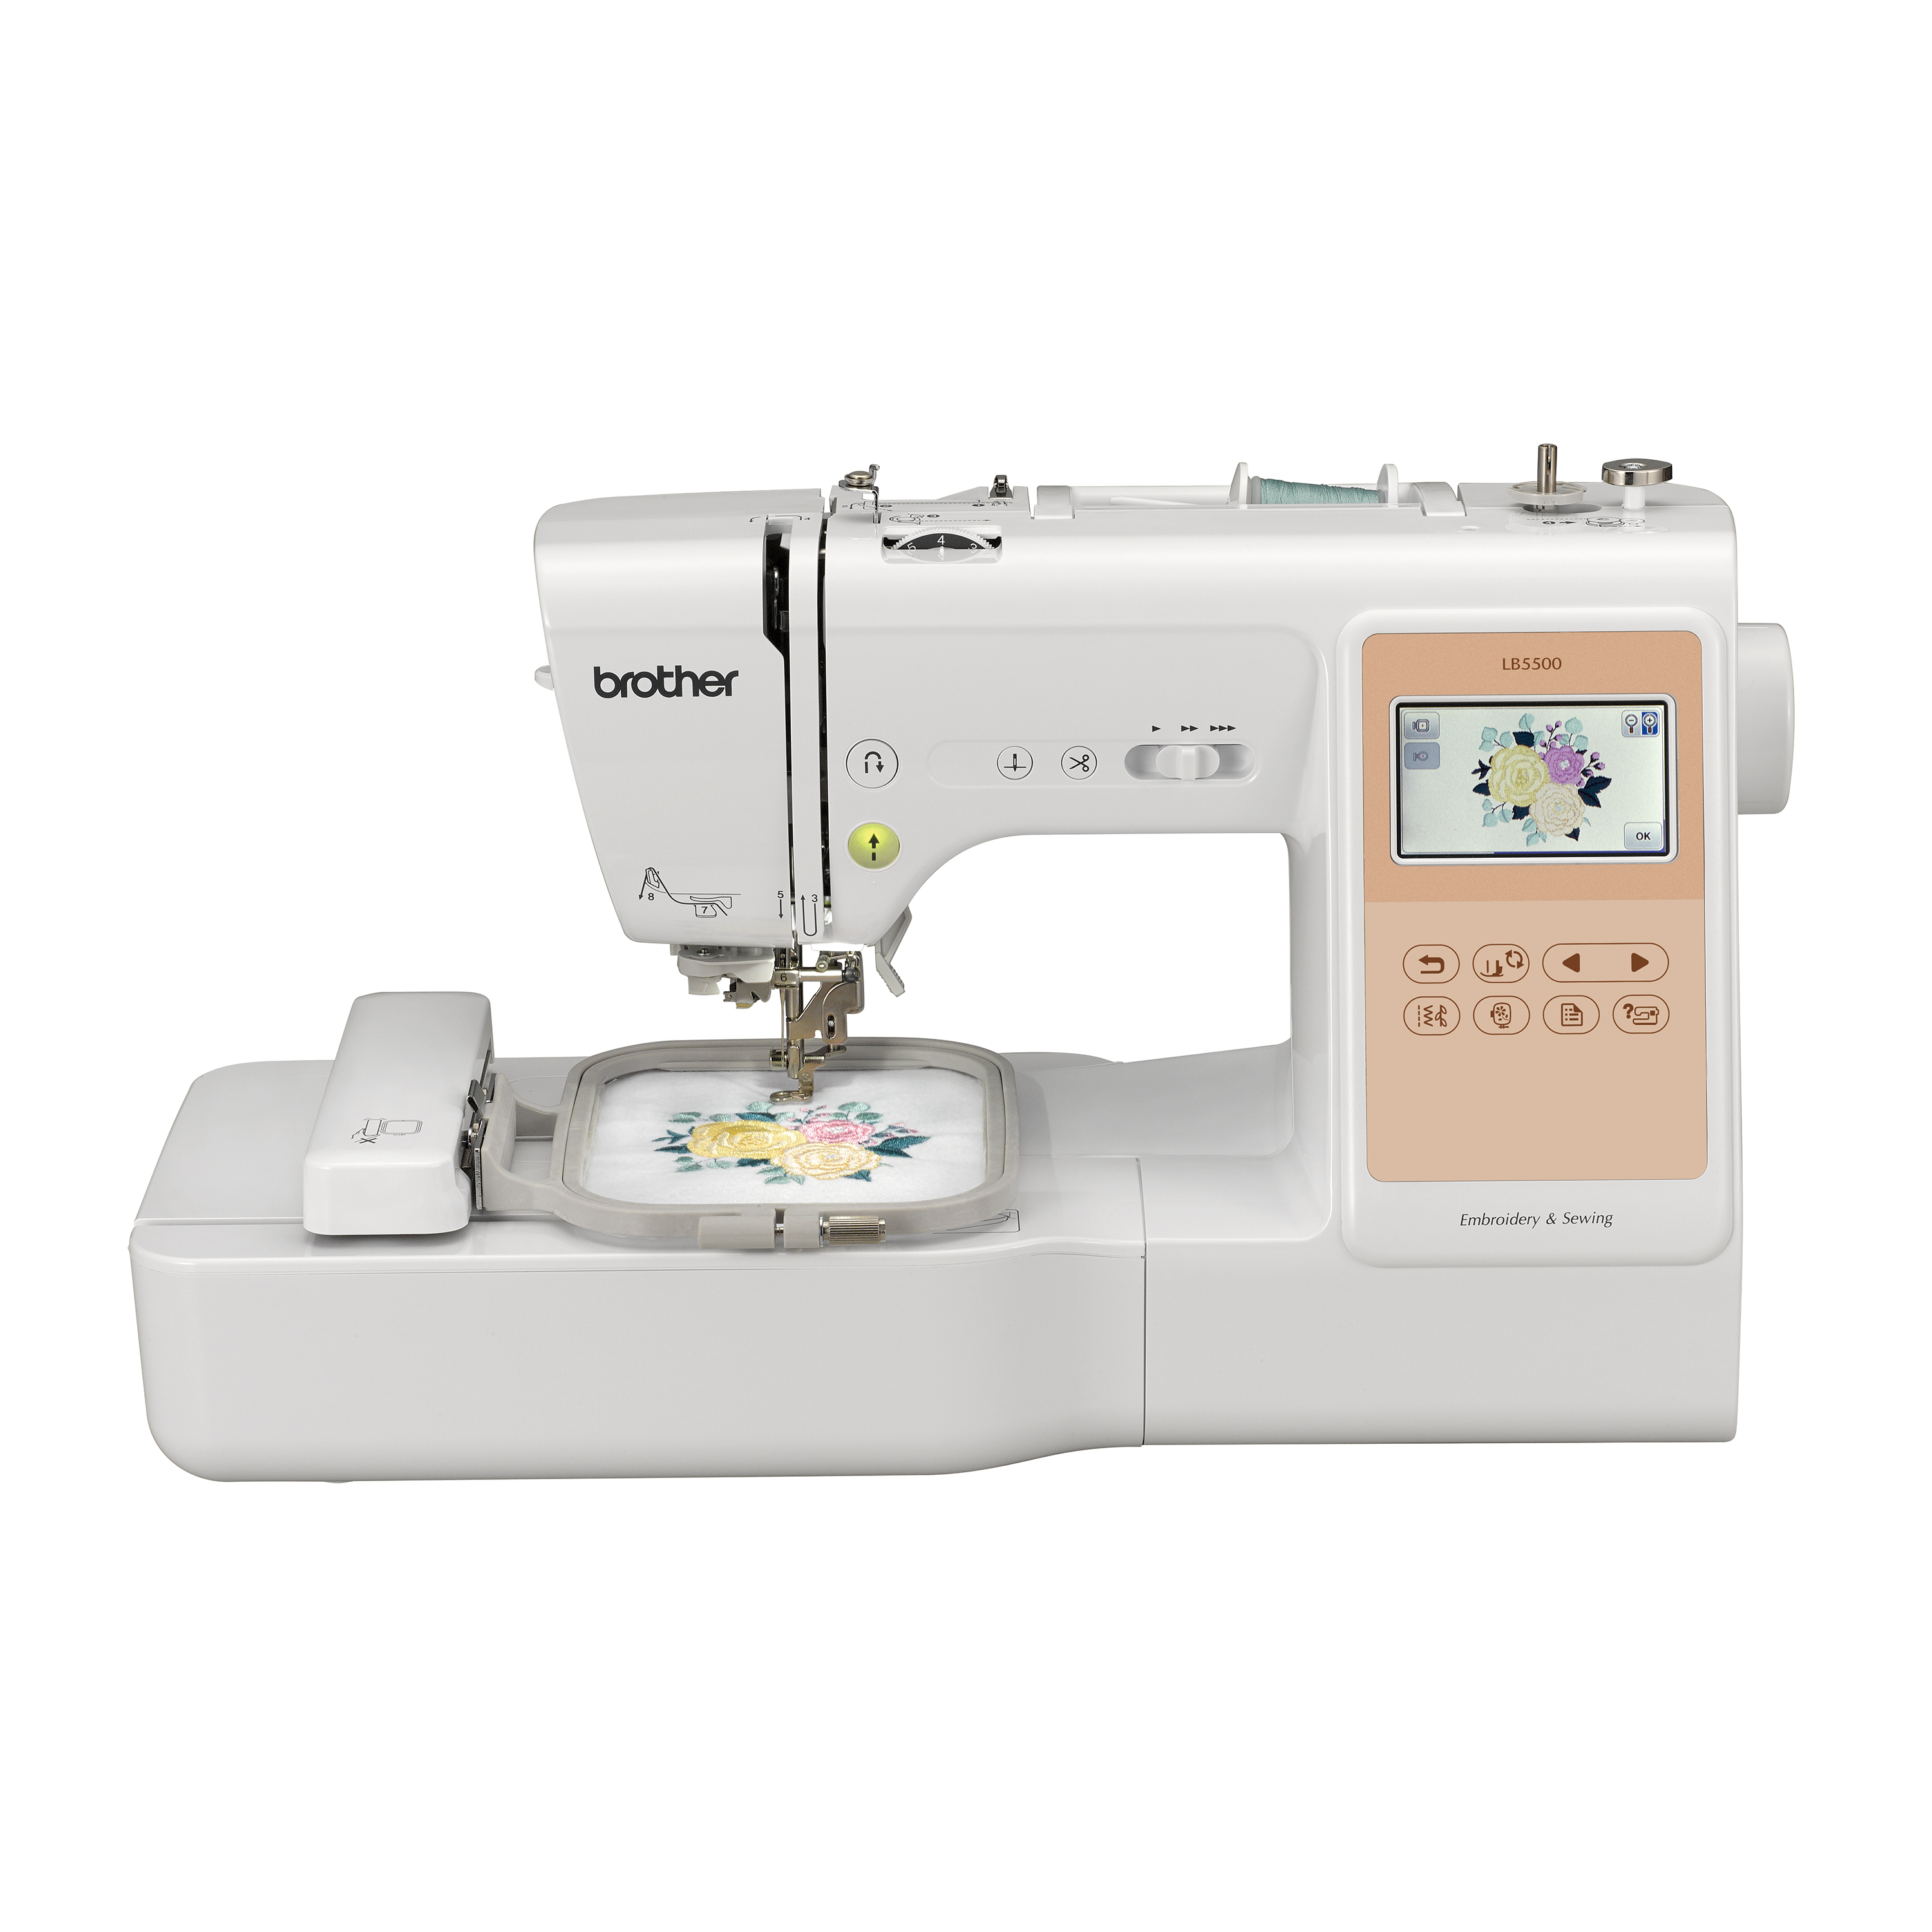 Brother SE725 Sewing and Embroidery Machine Refurbished